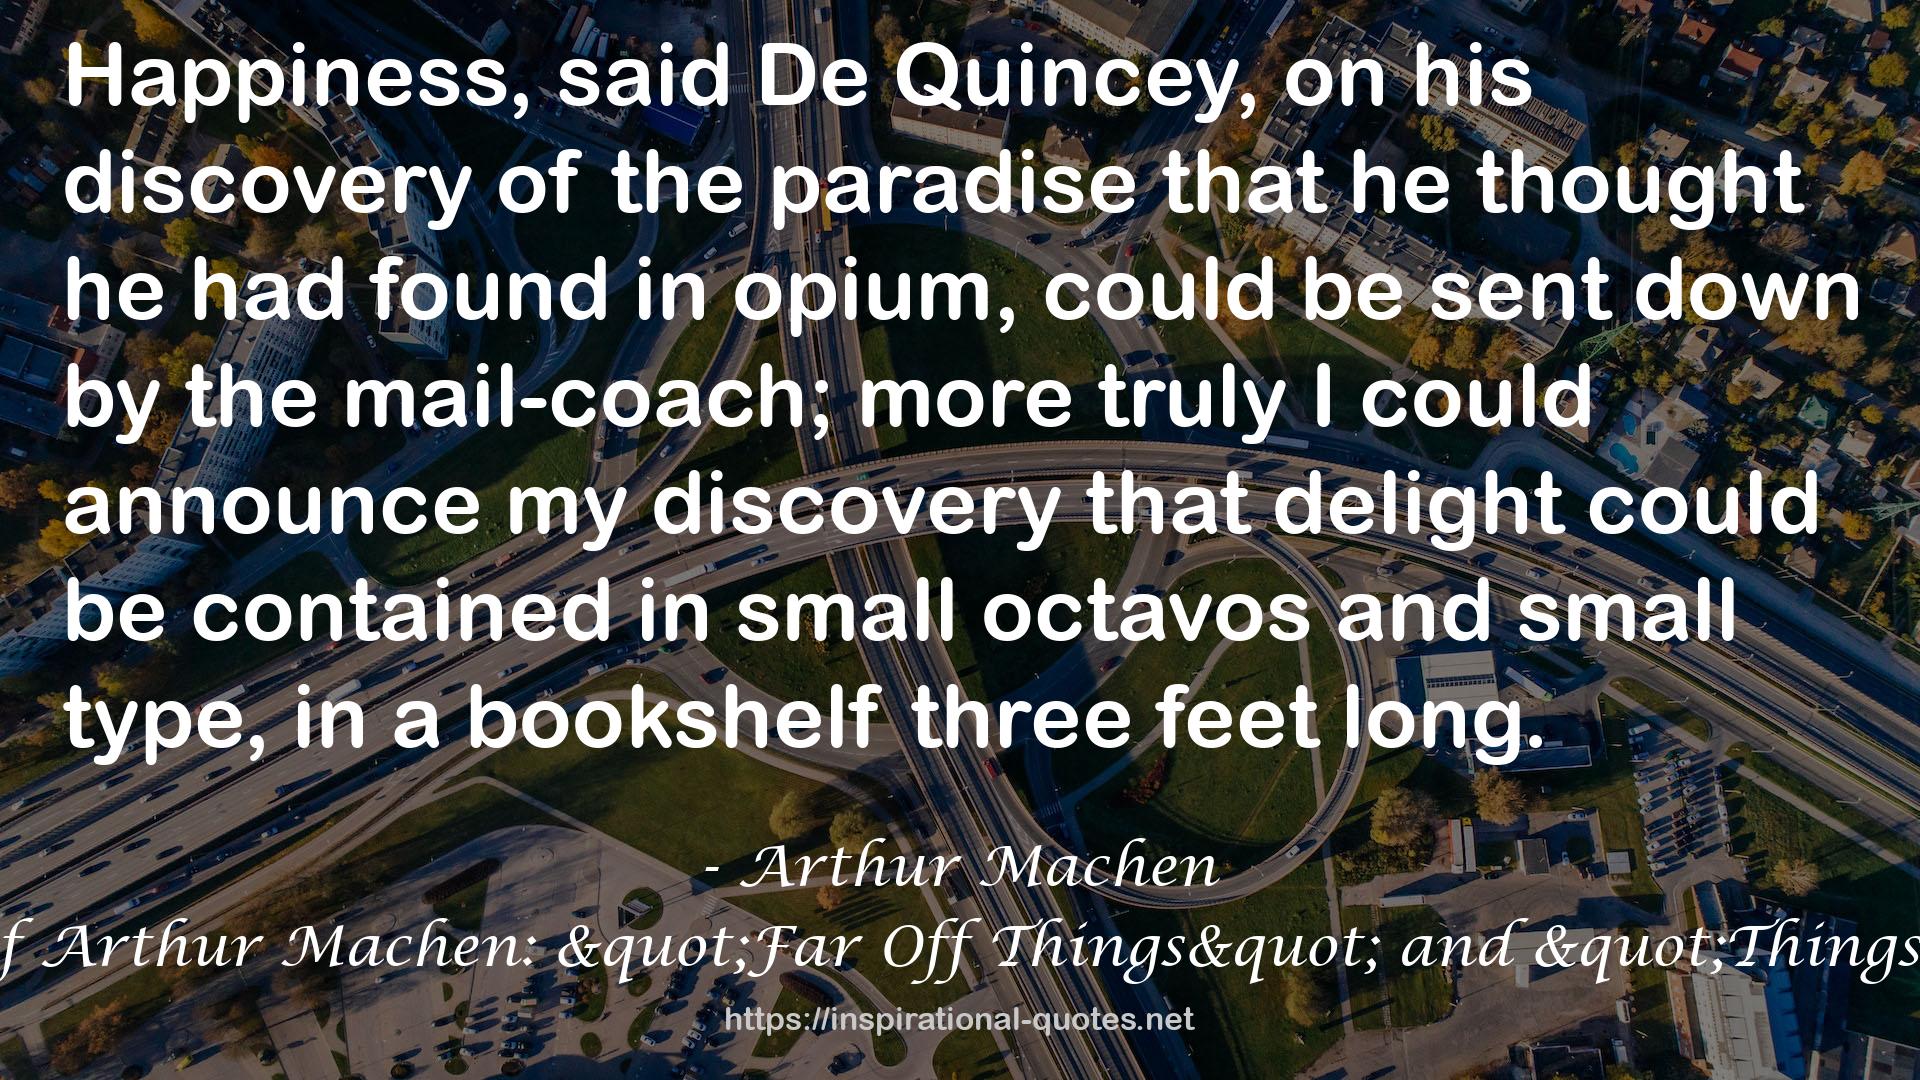 The Autobiography of Arthur Machen: "Far Off Things" and "Things Near and Far" QUOTES